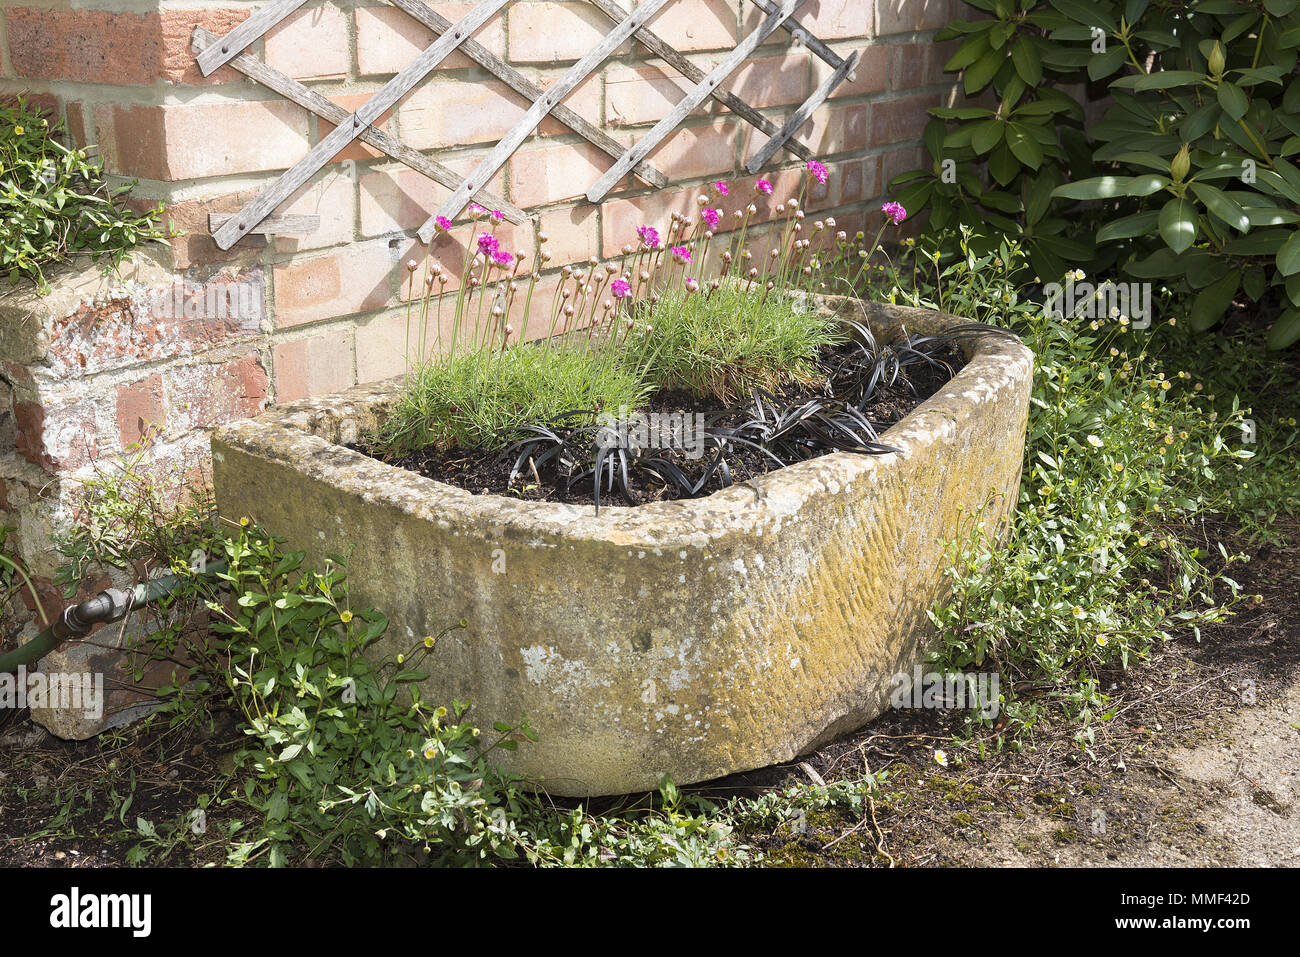 Stone trough container with pink armeria alpine plants and black ornamental grasses. Stock Photo